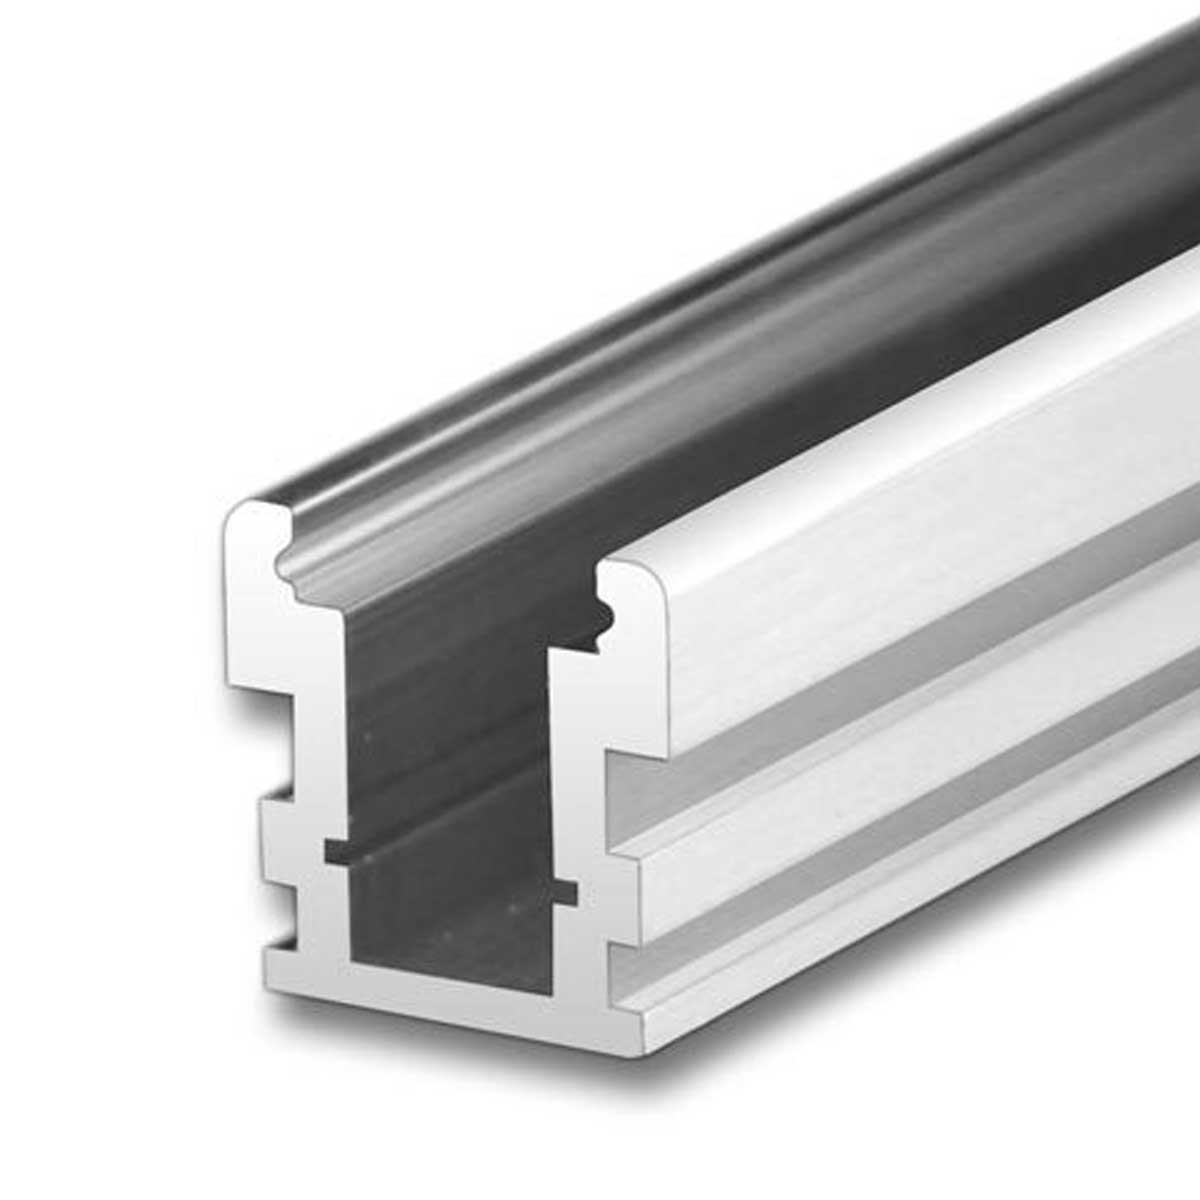 1000 Aluminium Slotted Channel Manufacturers, Suppliers in Bhubaneswar